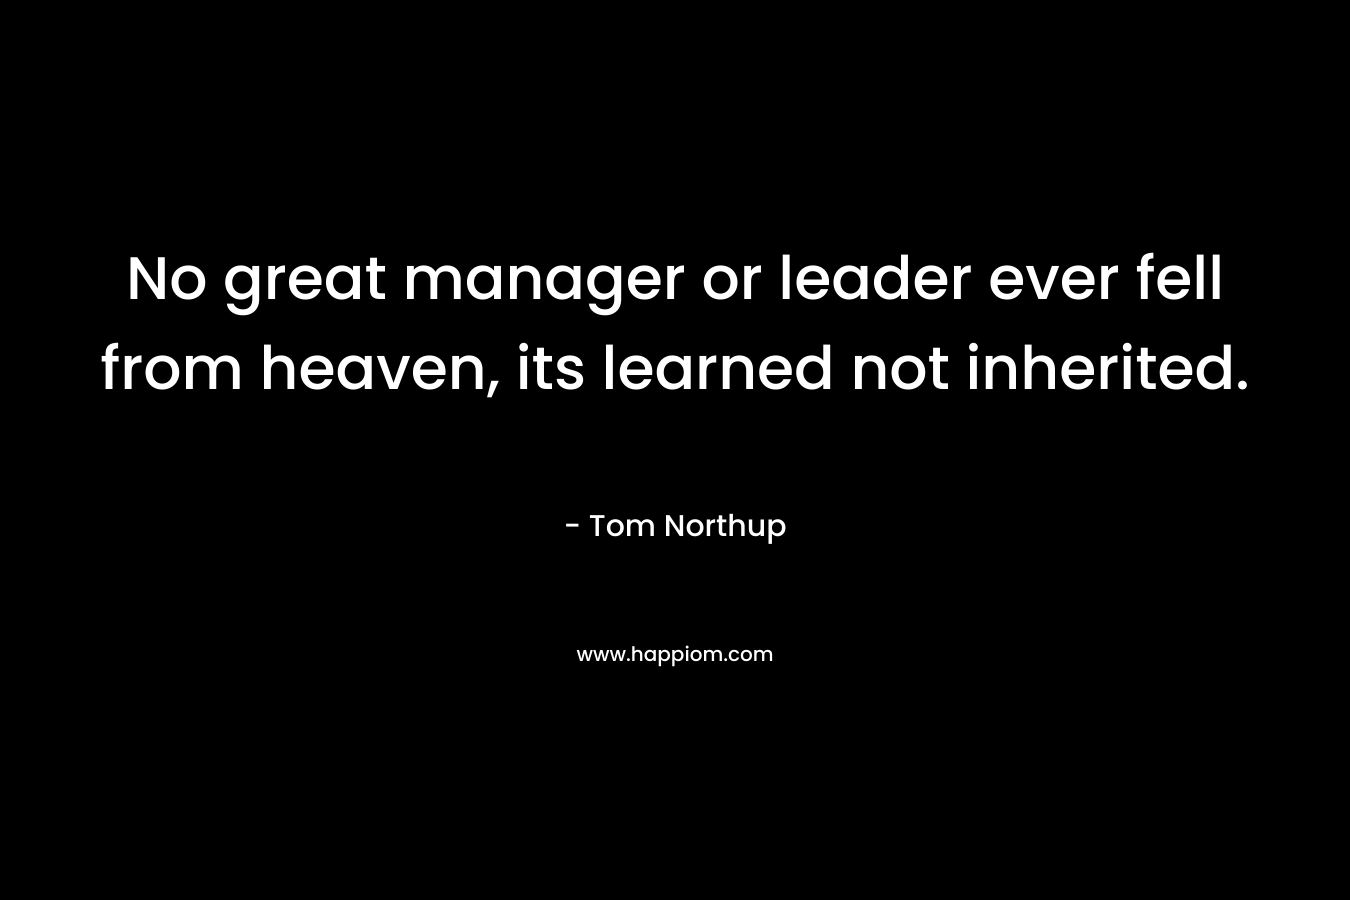 No great manager or leader ever fell from heaven, its learned not inherited. – Tom Northup